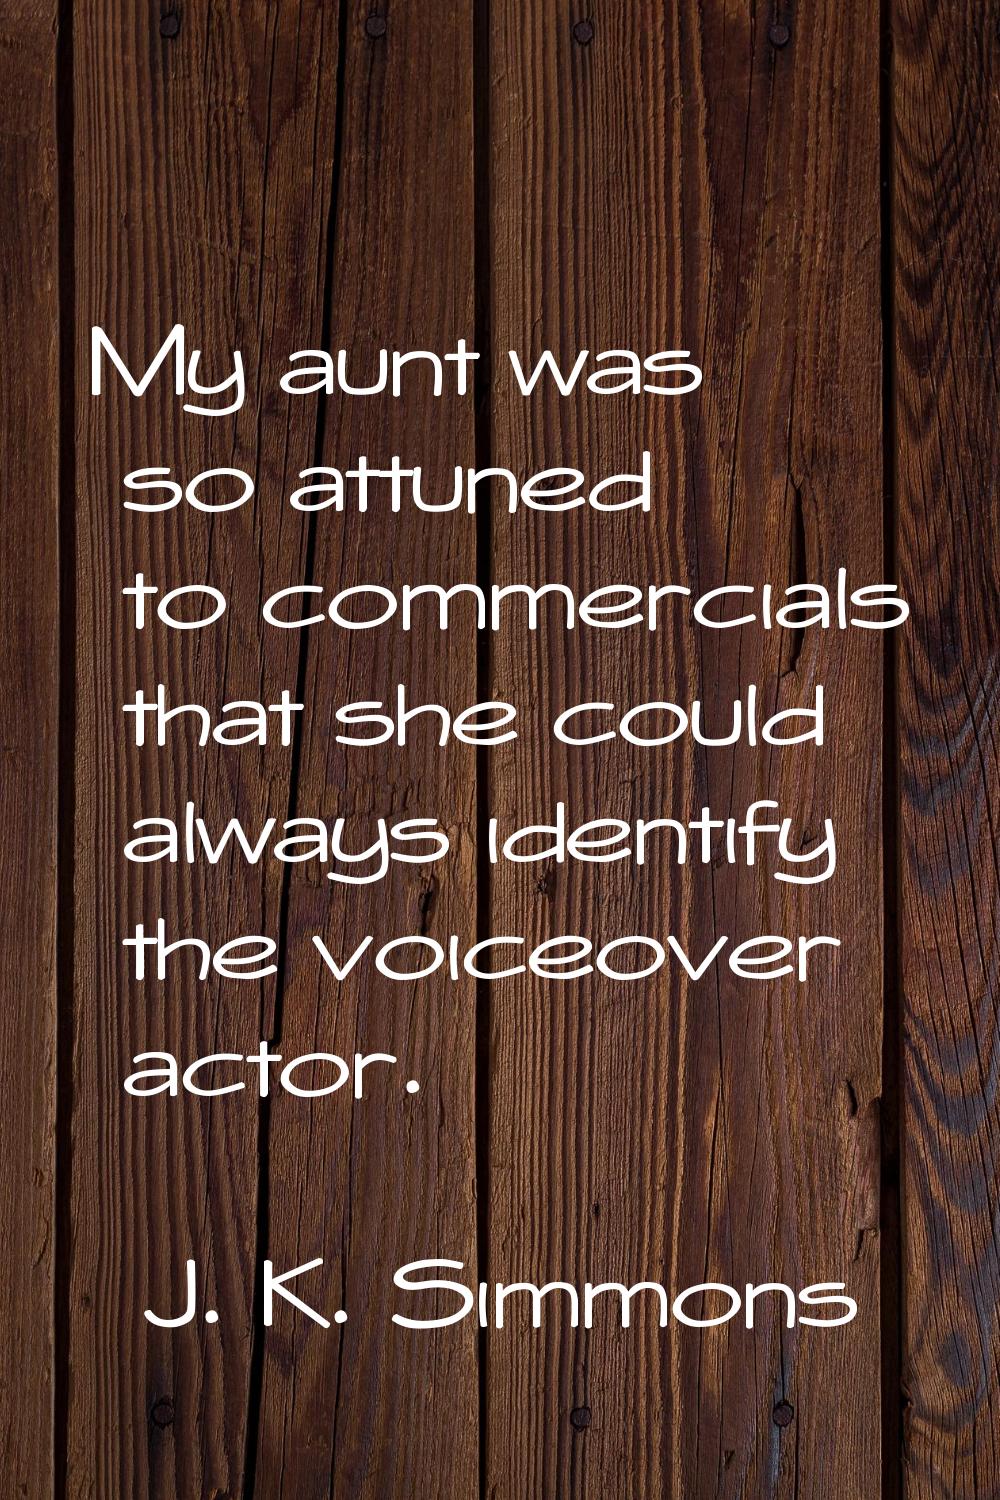 My aunt was so attuned to commercials that she could always identify the voiceover actor.